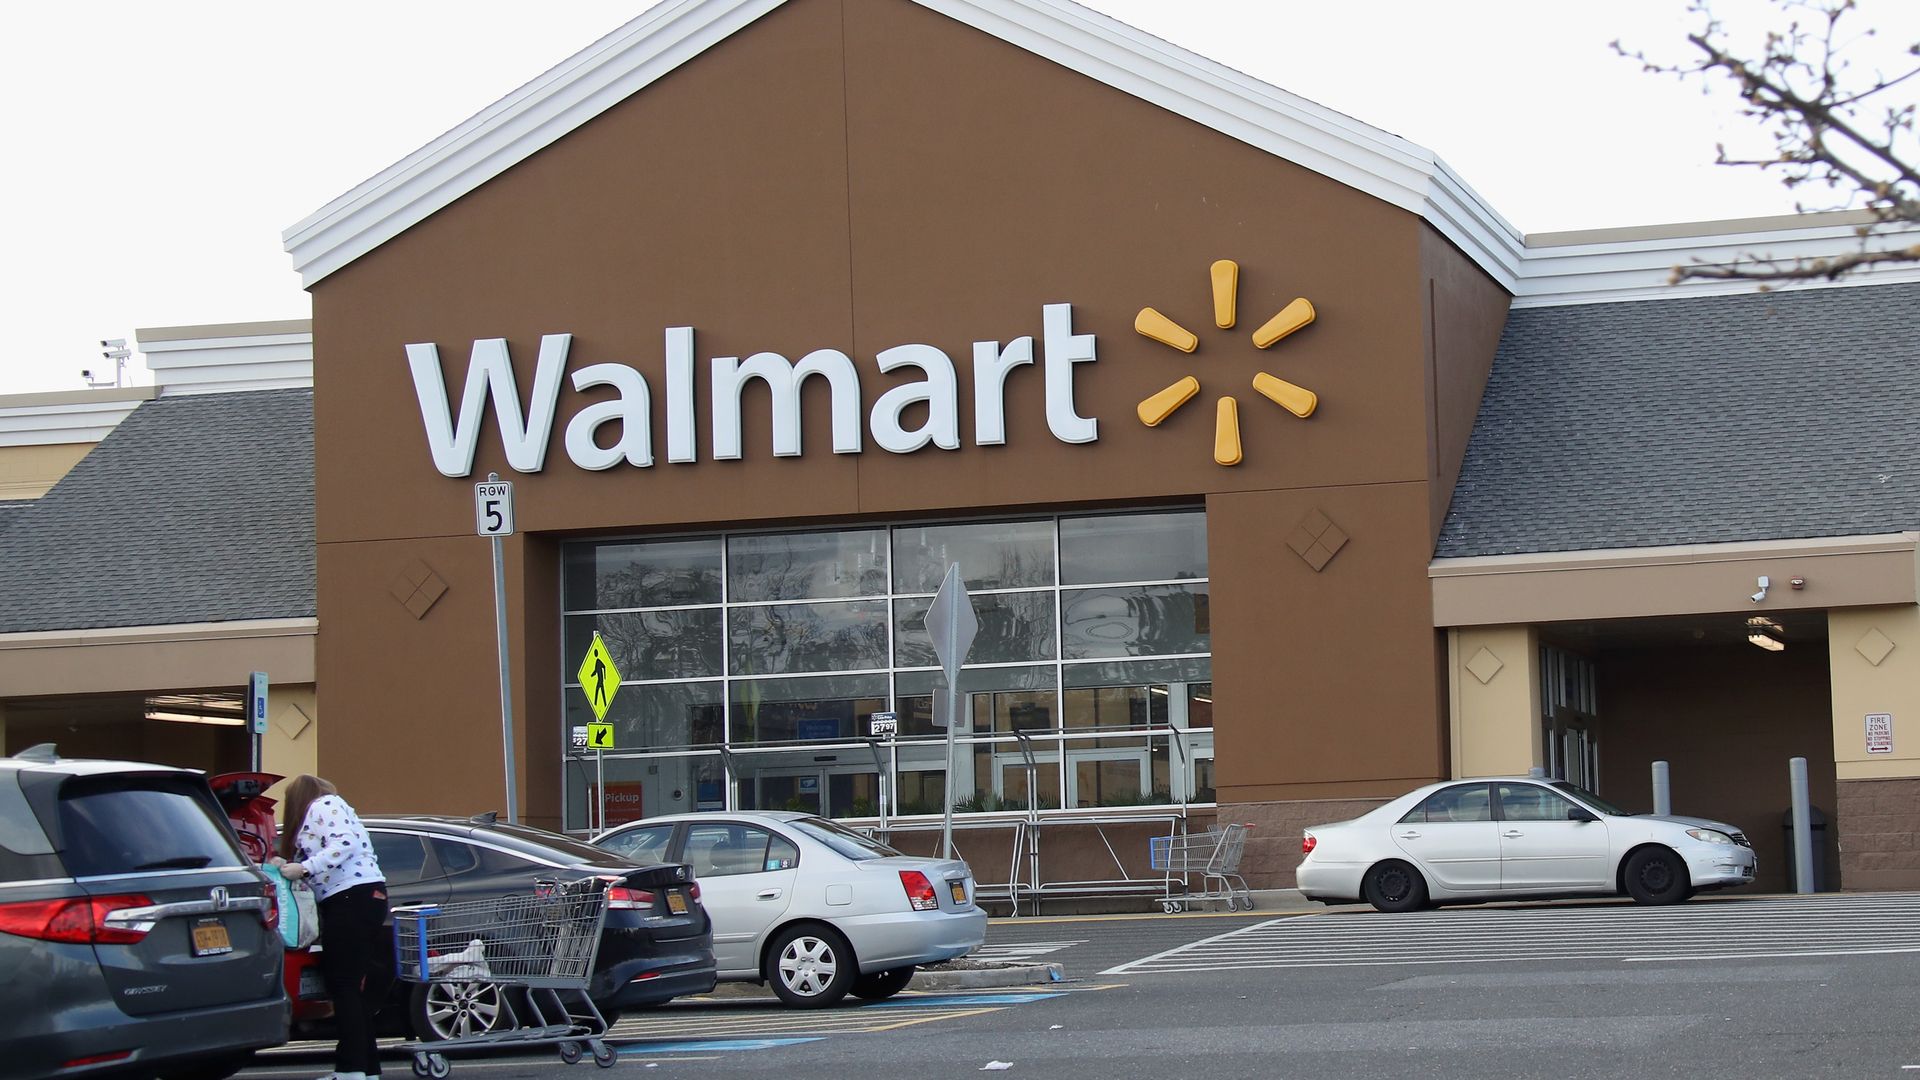 An image of the sign for Walmart as photographed on March 16, 2020 in East Setauket, New York. 